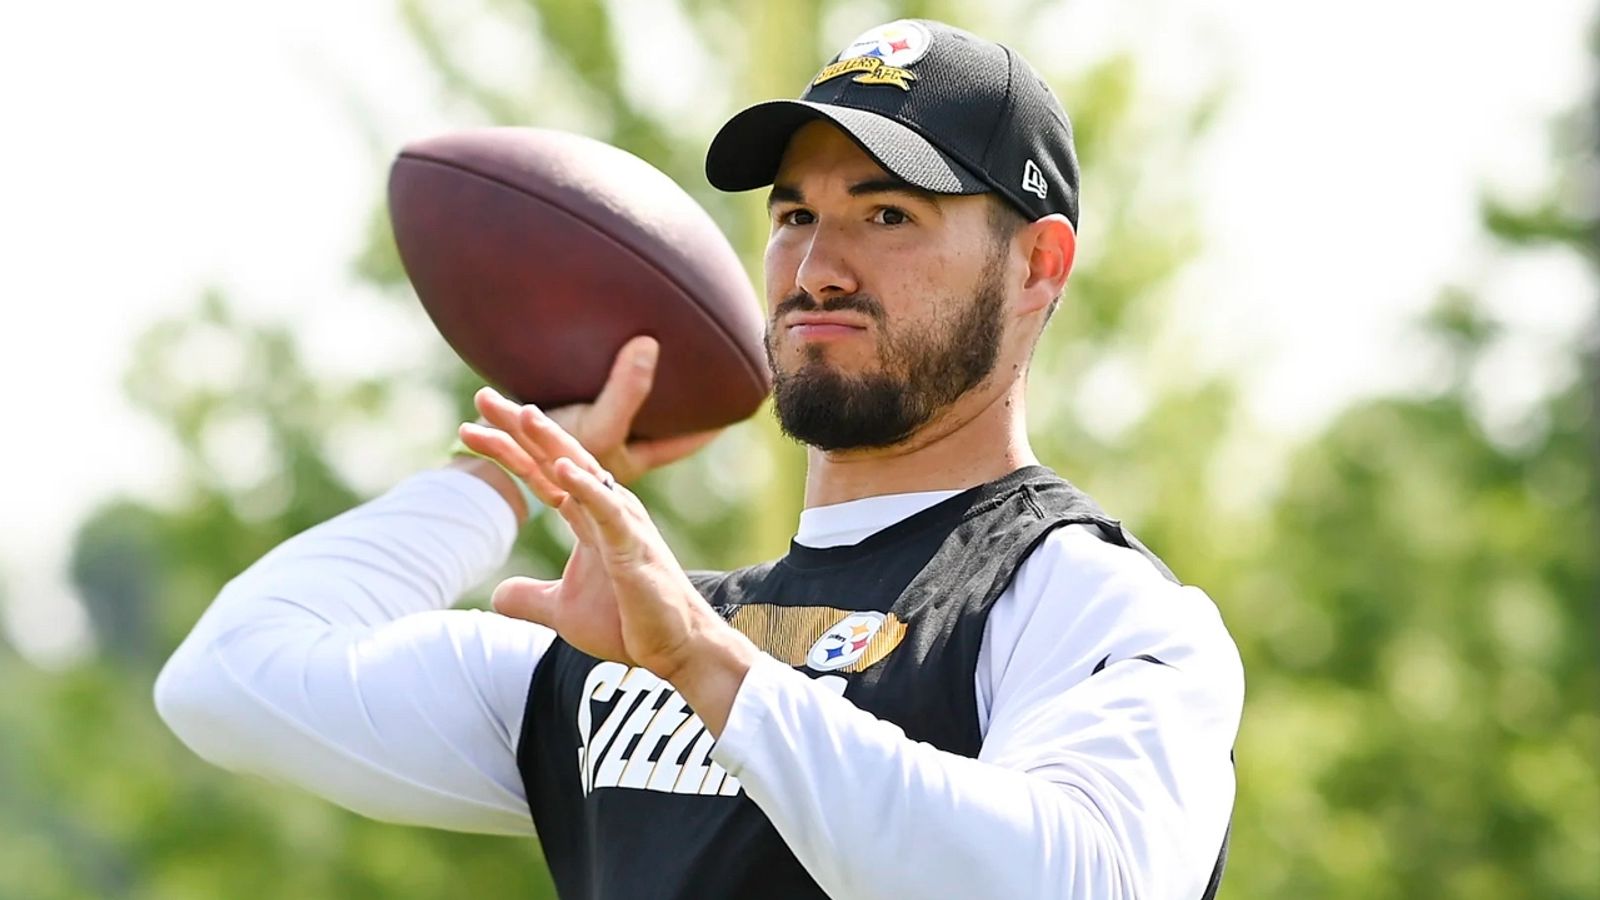 Trubisky starting QB, rookie Pickett the backup for Steelers